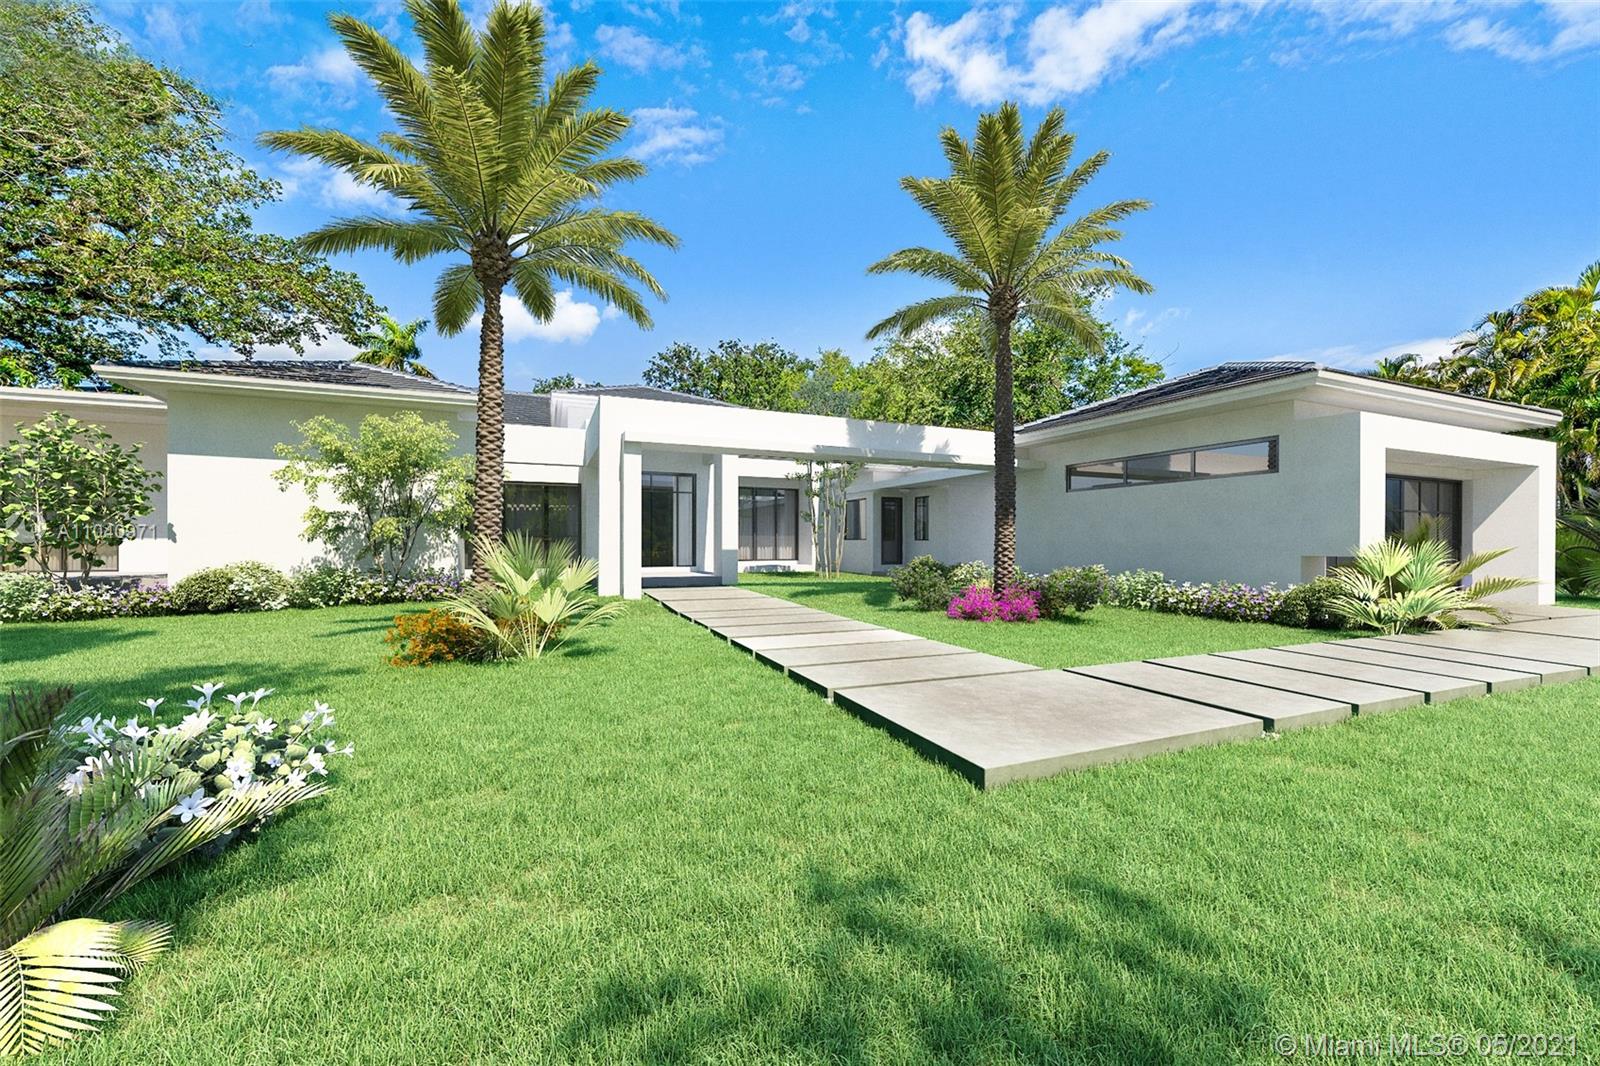 This spectacular modern estate built by Crawford Development offers a grand North Pinecrest location & situated on an expansive corner lot covered w/ green grounds & beautiful oaks and foliage. This gorgeous 5,500 sq ft custom design offers an open floorpan which wraps around a reflecting pool for a zen like feel throughout. Chef's kitchen designed by Italkraft & w/ Thermador Appliances, Island, Wine Cooler & Pantry. Cabana with outdoor kitchen & full bath perfect for entertaining. Oversized master overlooking reflecting pool, sitting area & Walk-In Closet. Unique design features channeling midcentury modern influences throughout. Other features include 2 car garage w/ space to add lift for additional parking, generator ready, two entrances on each side of lot a& A+ schools.